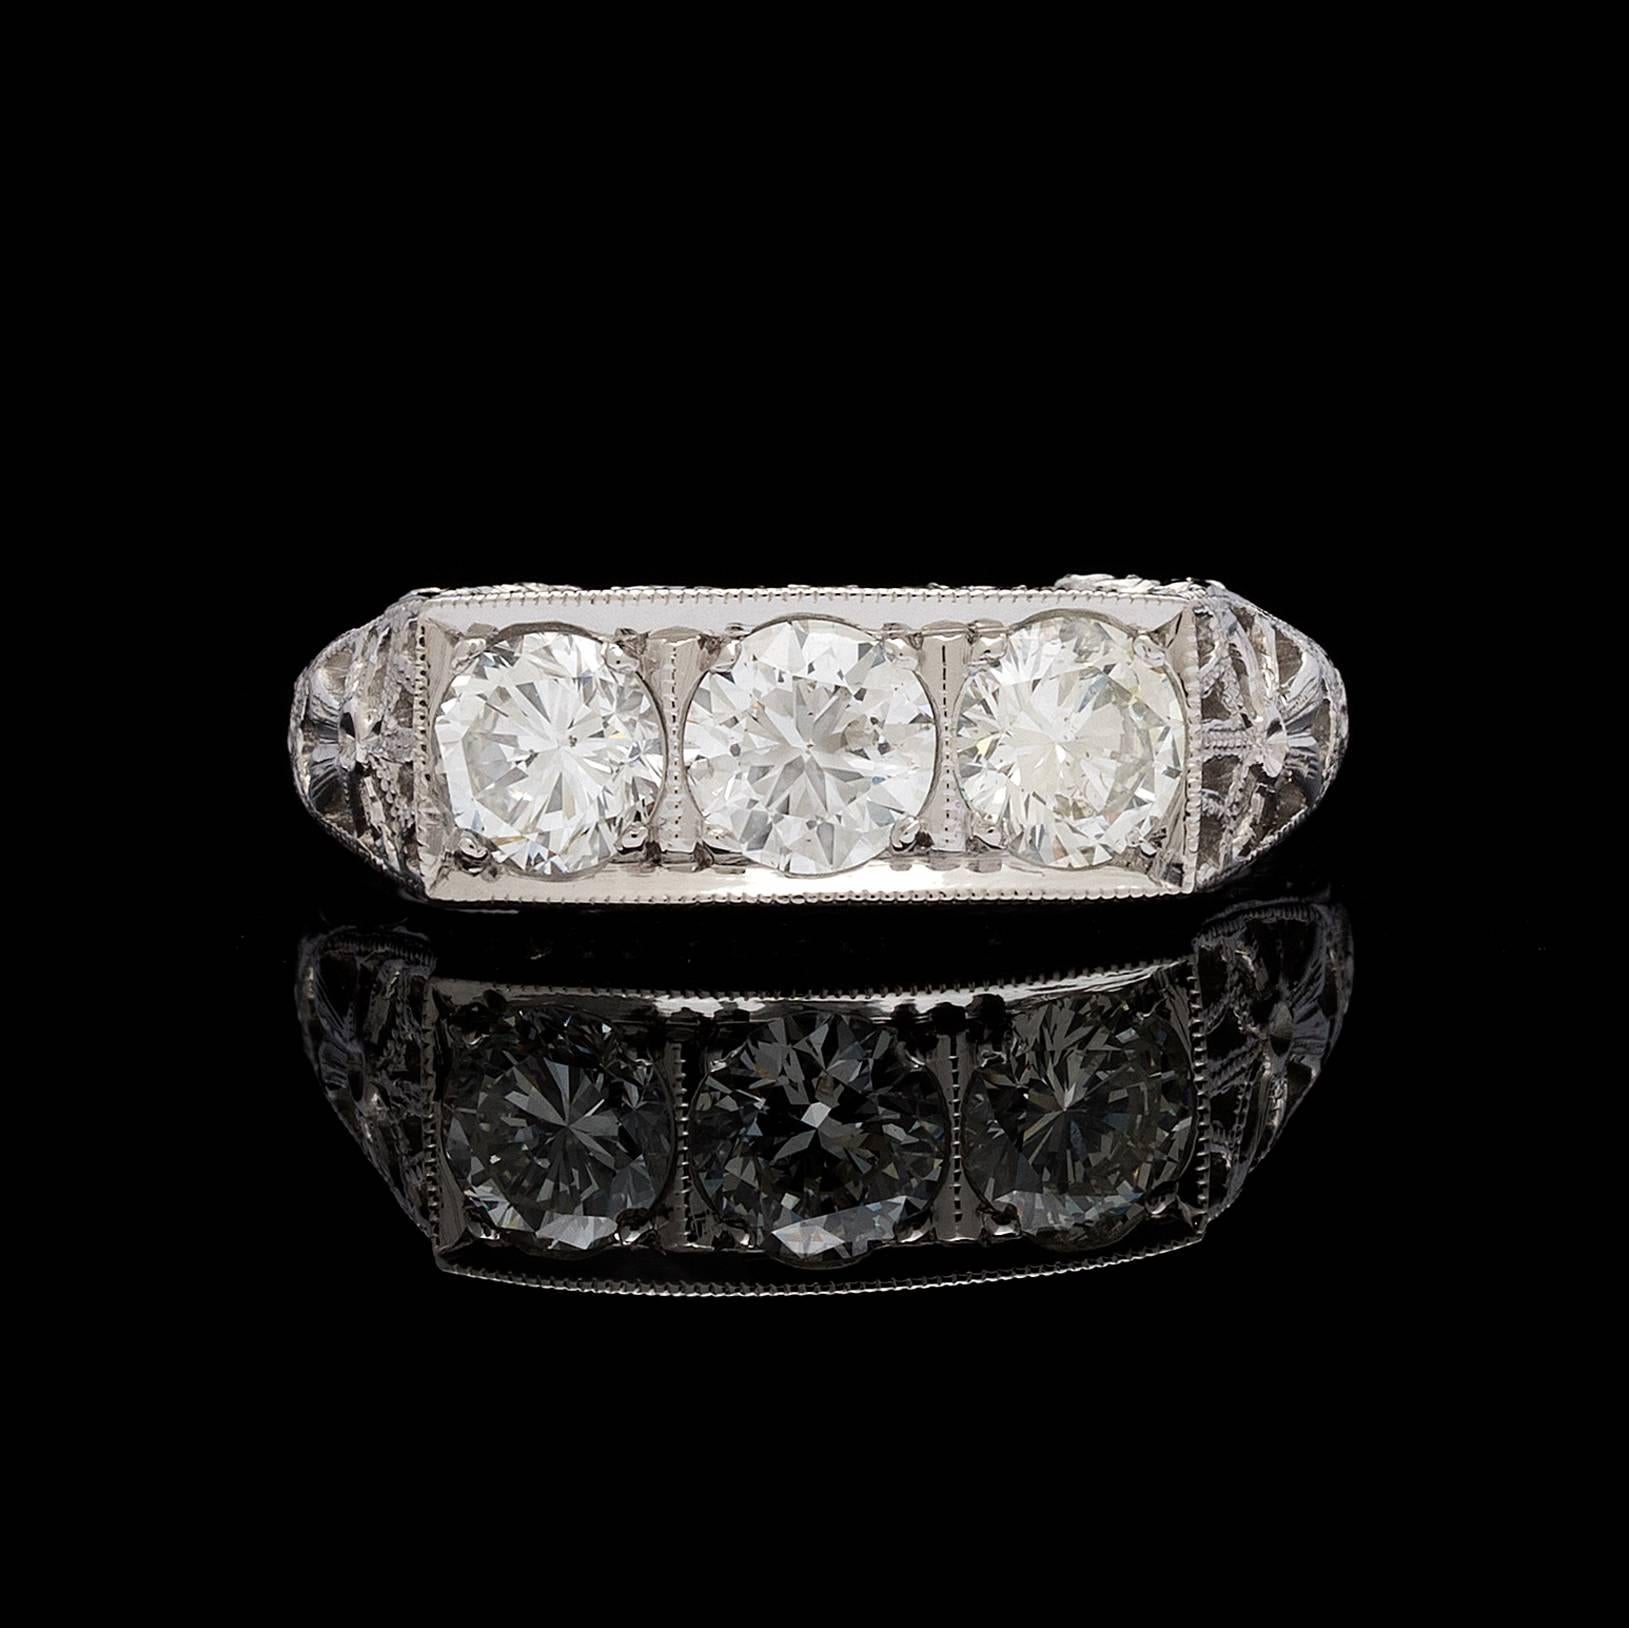 3 round brilliant cut diamonds totaling 1.38 carats set in a filigree design platinum ring detailed with milgrain, openwork, and engraving work. Ring size is a 6.25 and can be resized. Total weight of the ring is 7.8 grams. 